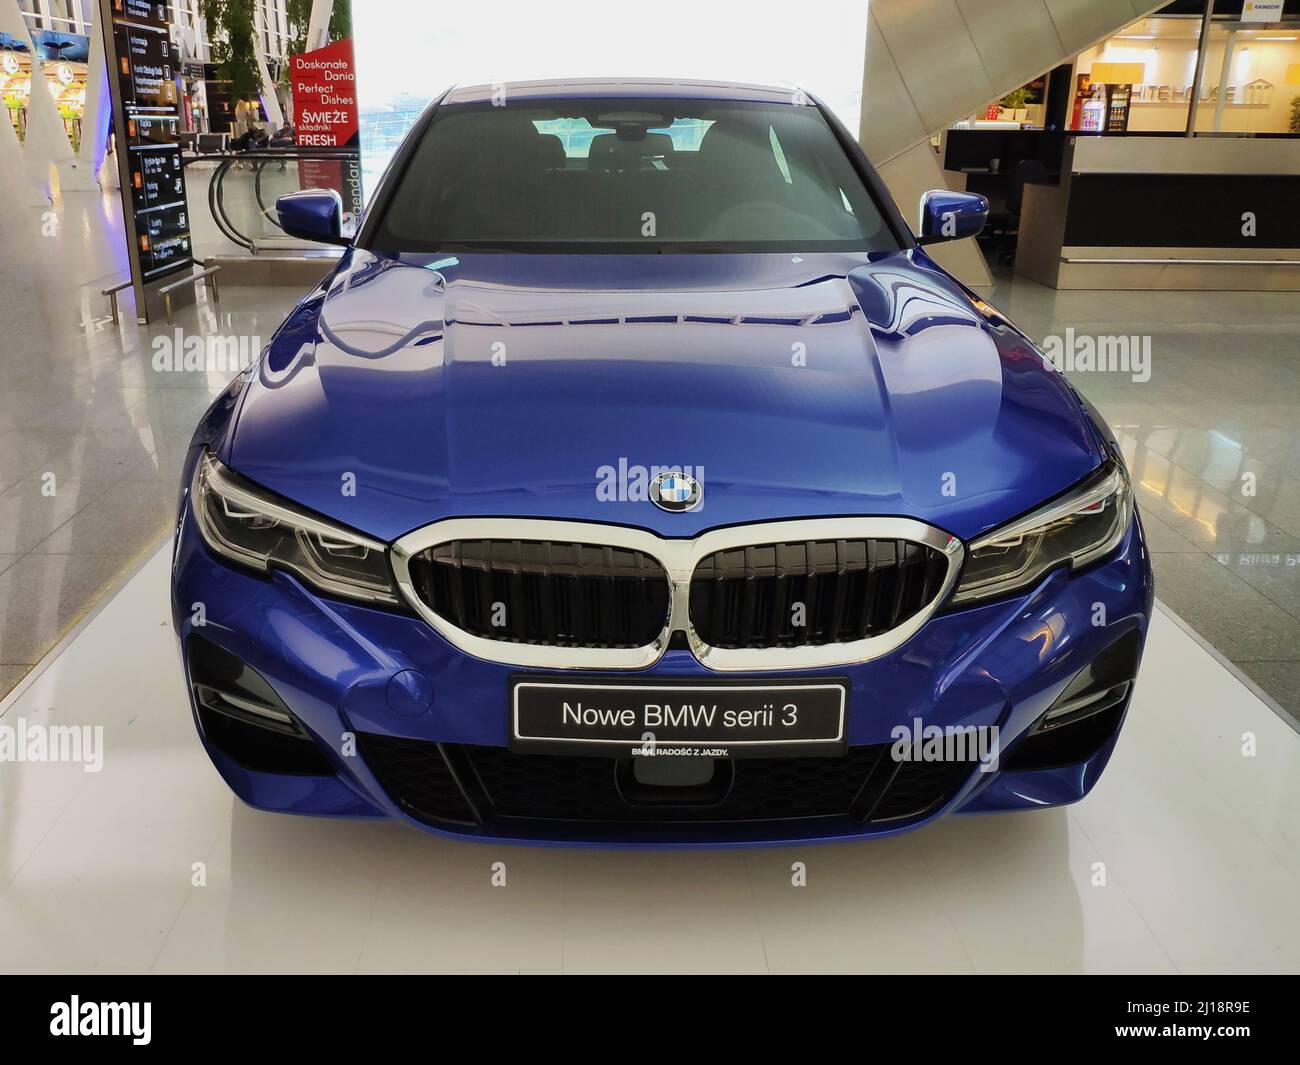 Wroclaw, Poland - Nov 15, 2019: BMW Serie 3 at display stand Stock Photo